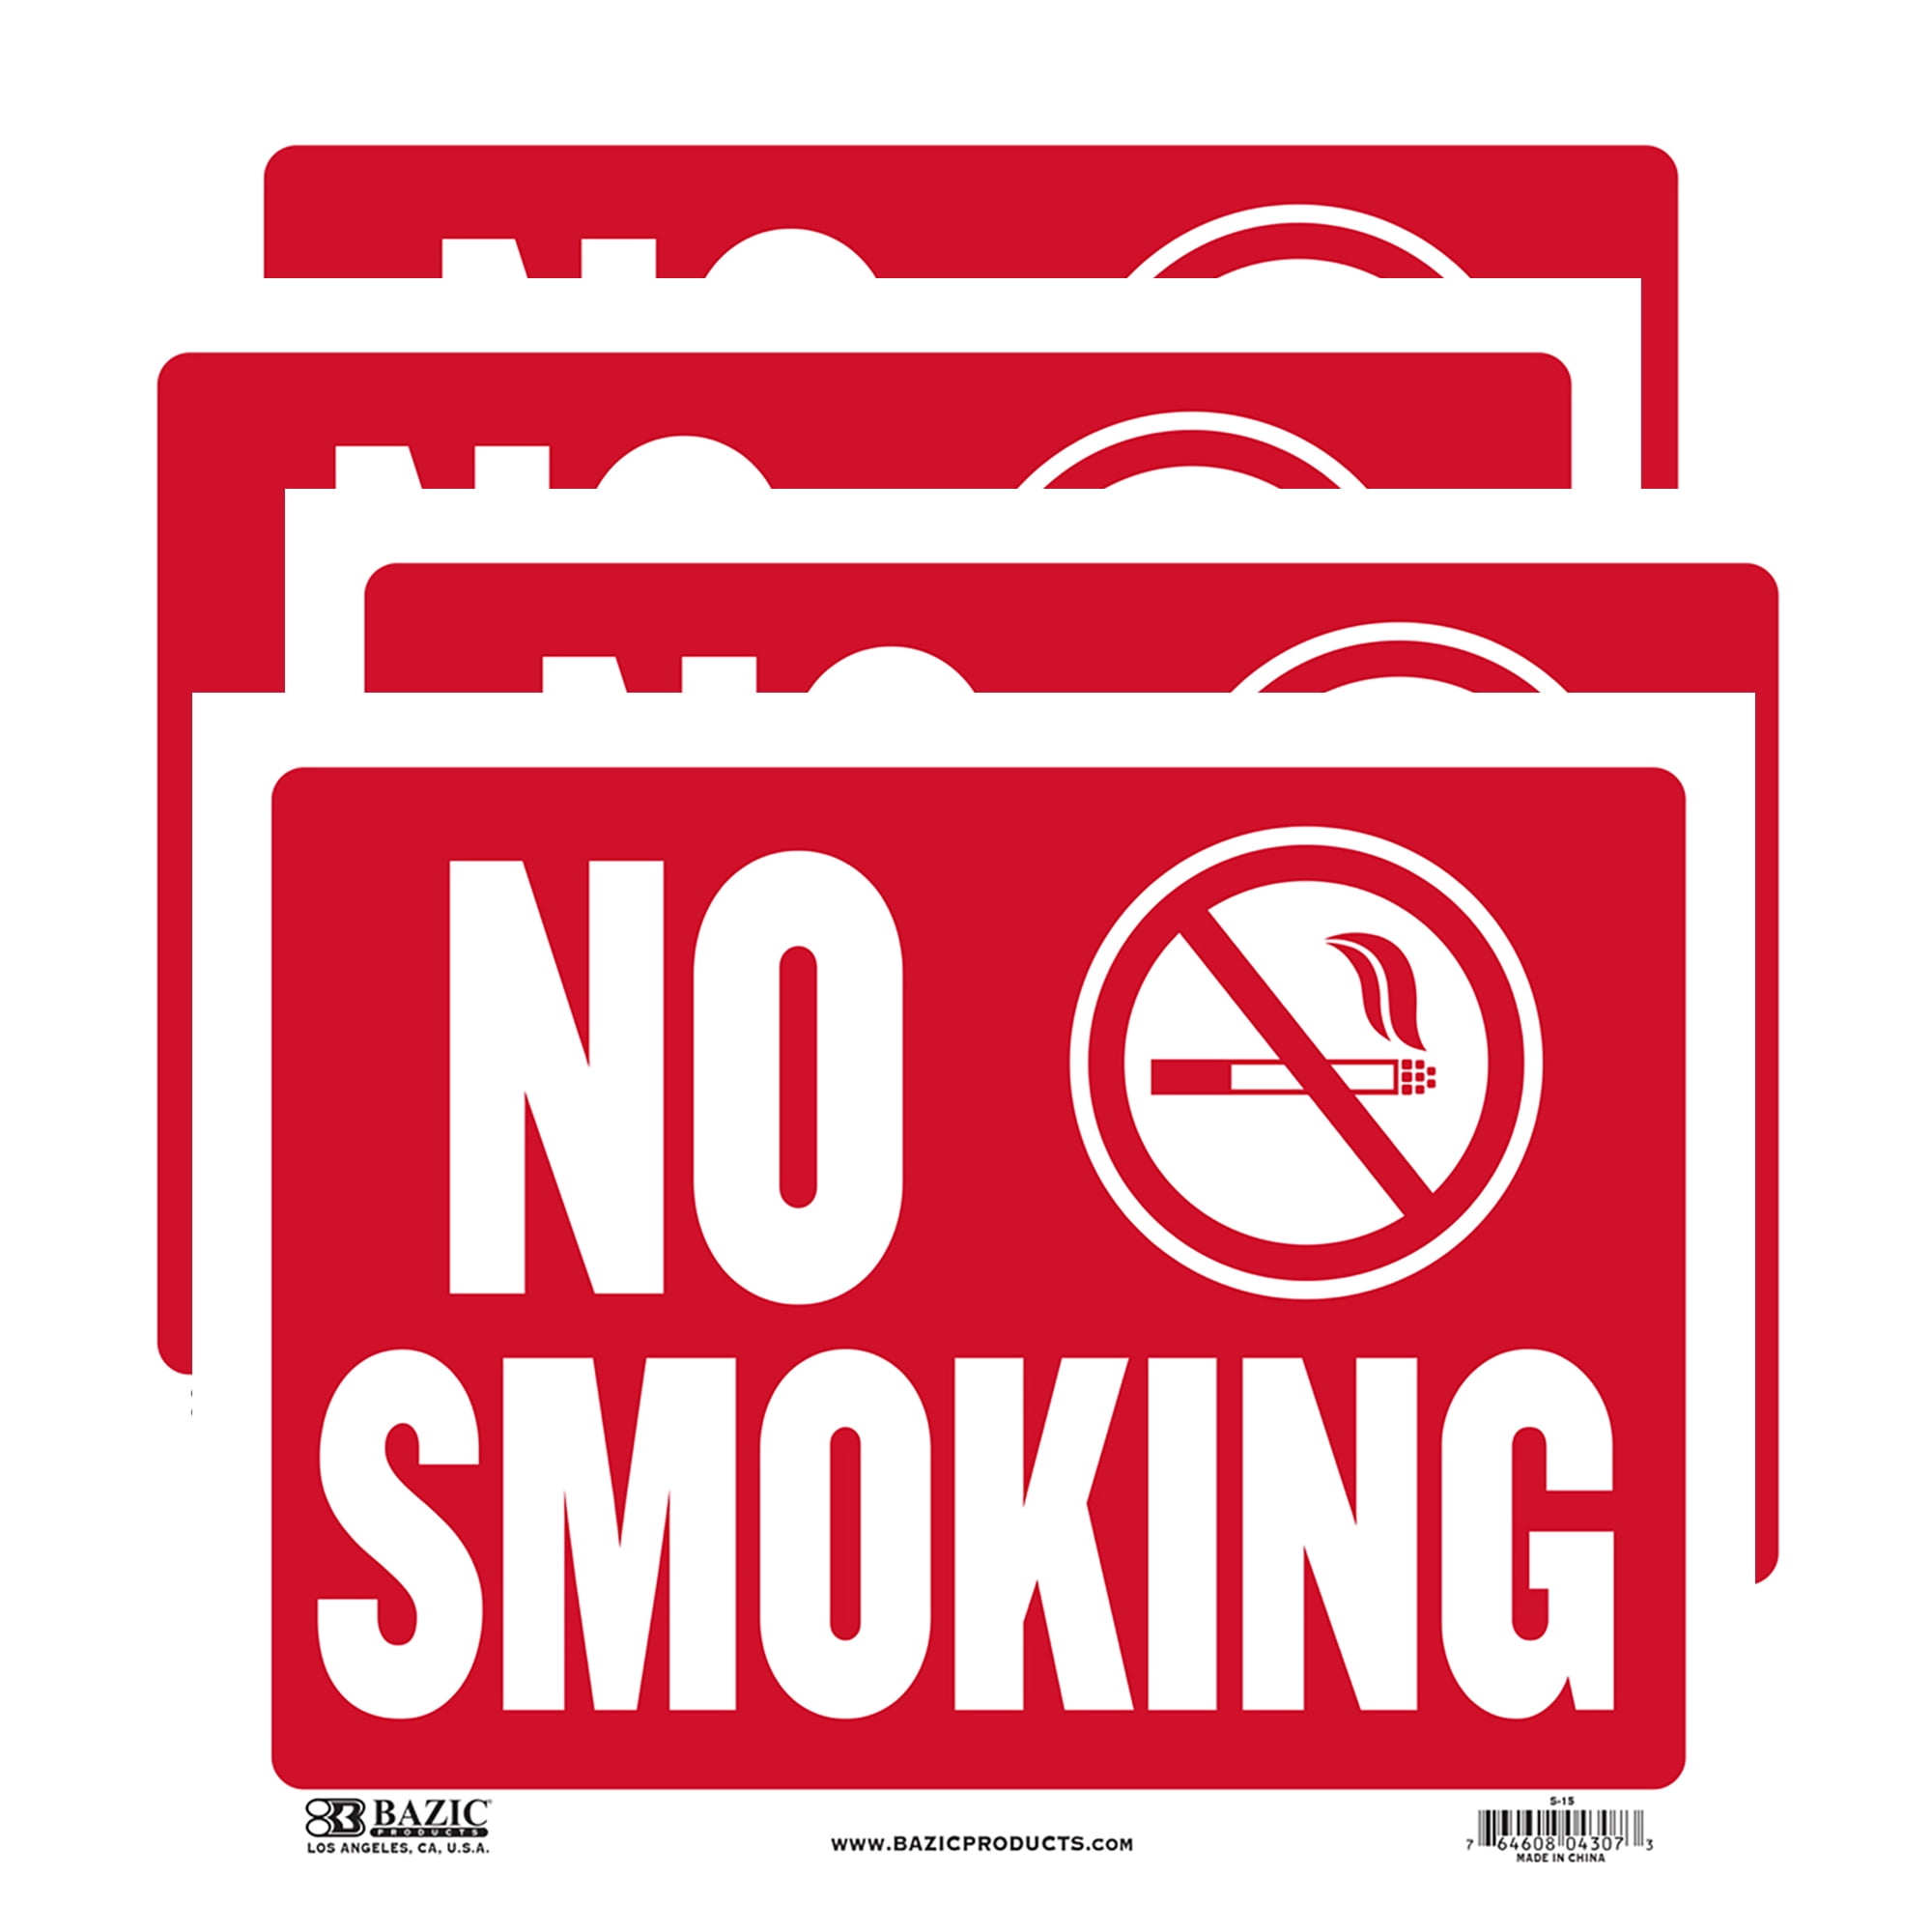 Made in USA This is a Smoke Free Property 9 x 12 Inch Metal Aluminum No Smoking Signs for Business Honey Dew Gifts No Smoking Signs 